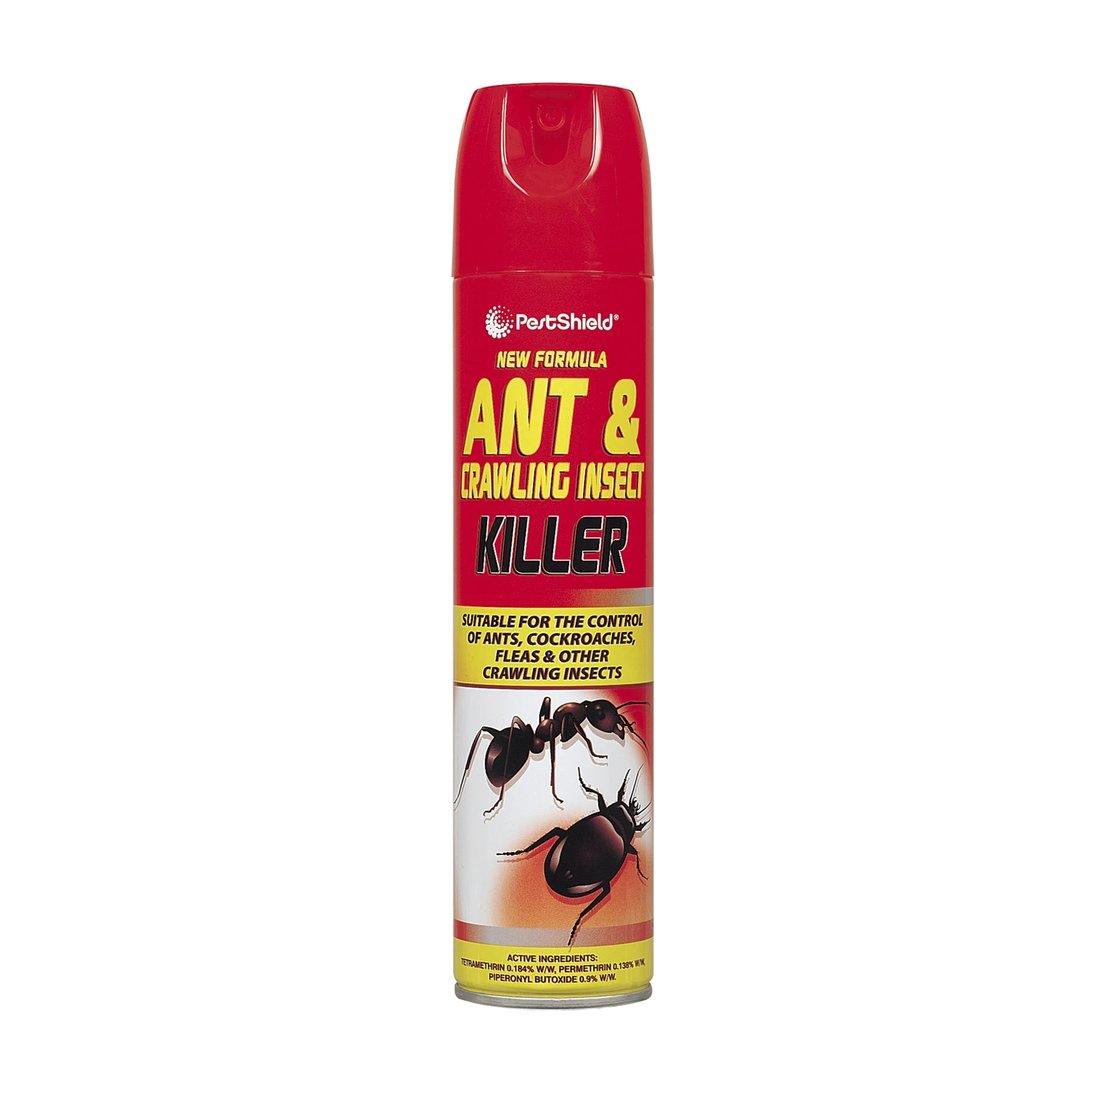 Pest Shield Ant &amp; Crawling Insect Killer Spray 300ml - Vending Superstore